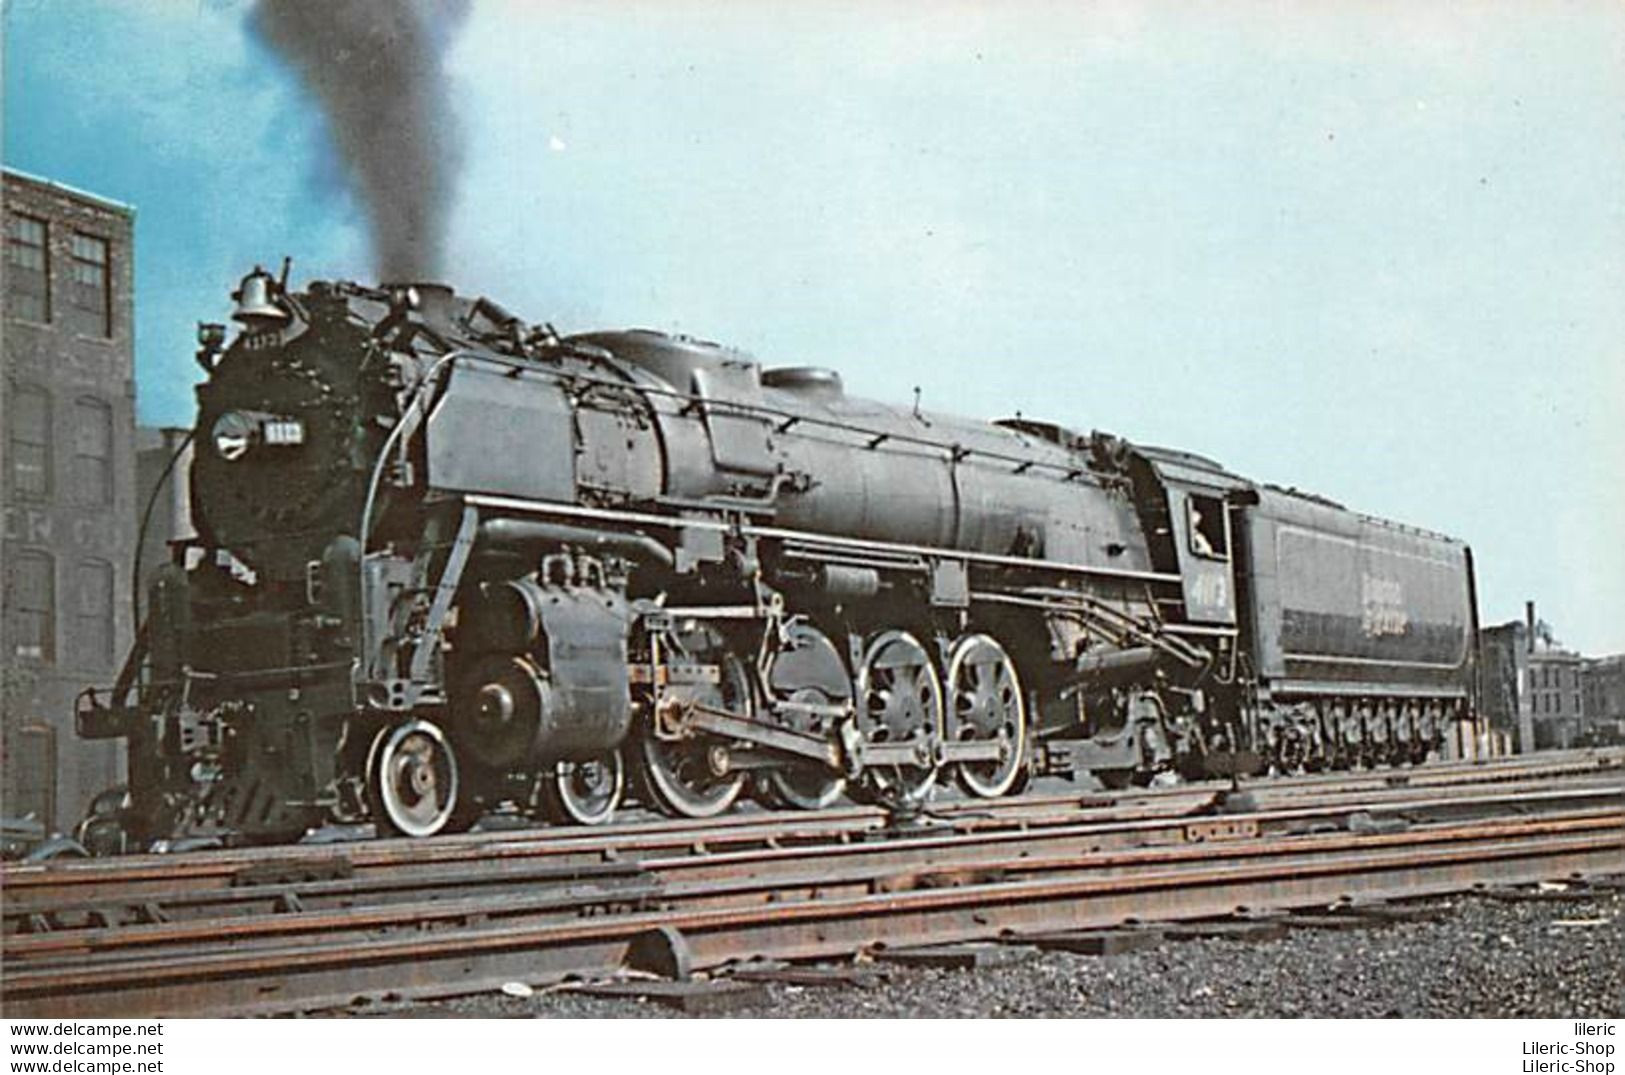 BOSTON & MAINE 4113 CARRIED THE NAME " BLACK ARROW " - WORCESTER, MASS, IN 1946 # TRAINS # US - Trains